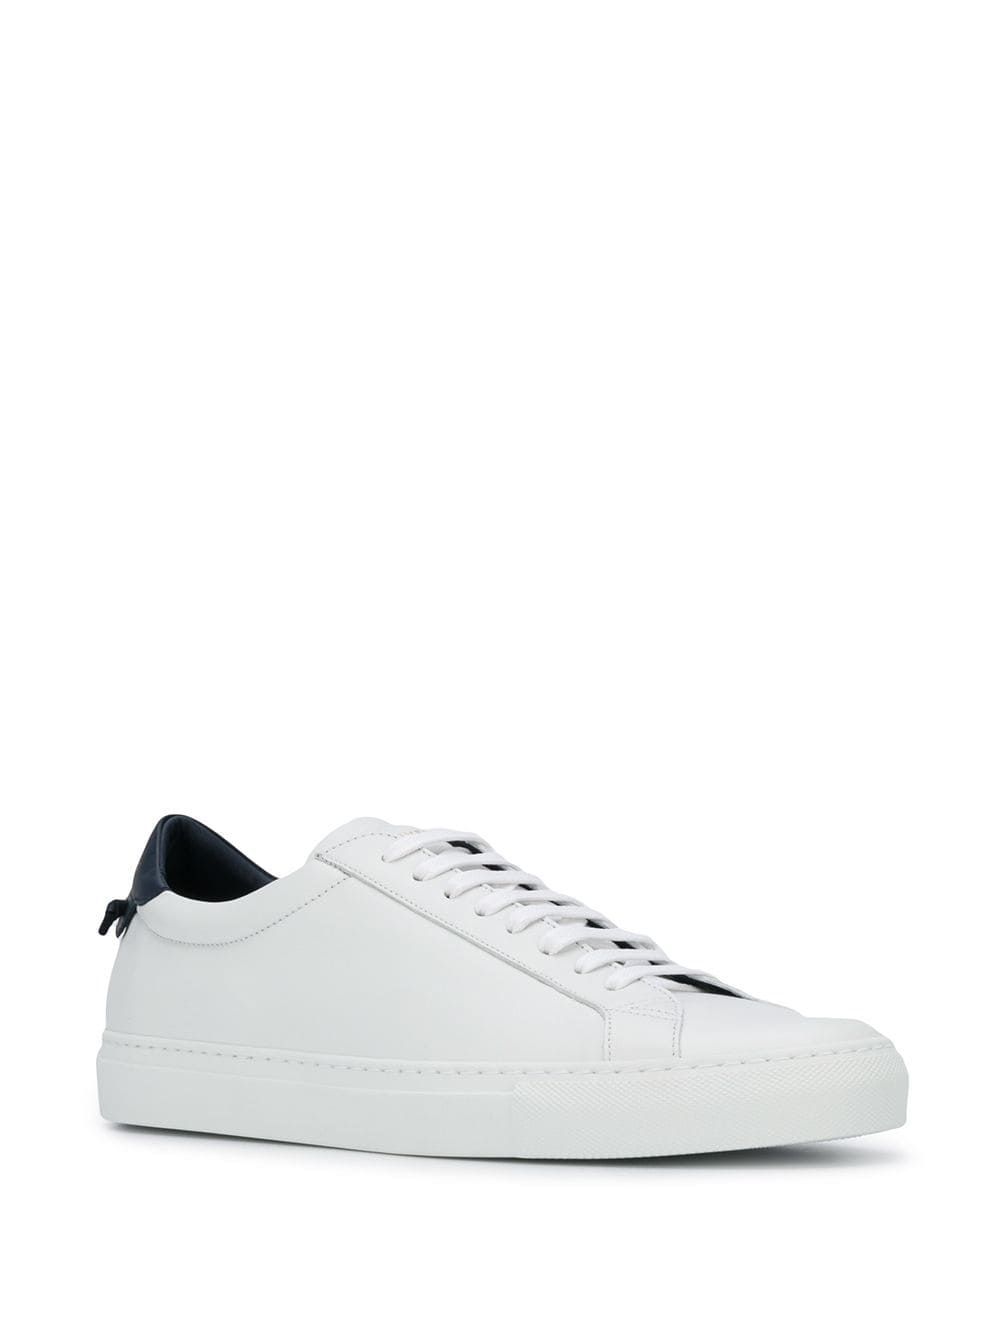 SNEAKERS GIVENCHY, LEATHER 100%, color BLACK, Rubber sole, SS21, product code BH0002H0FS116